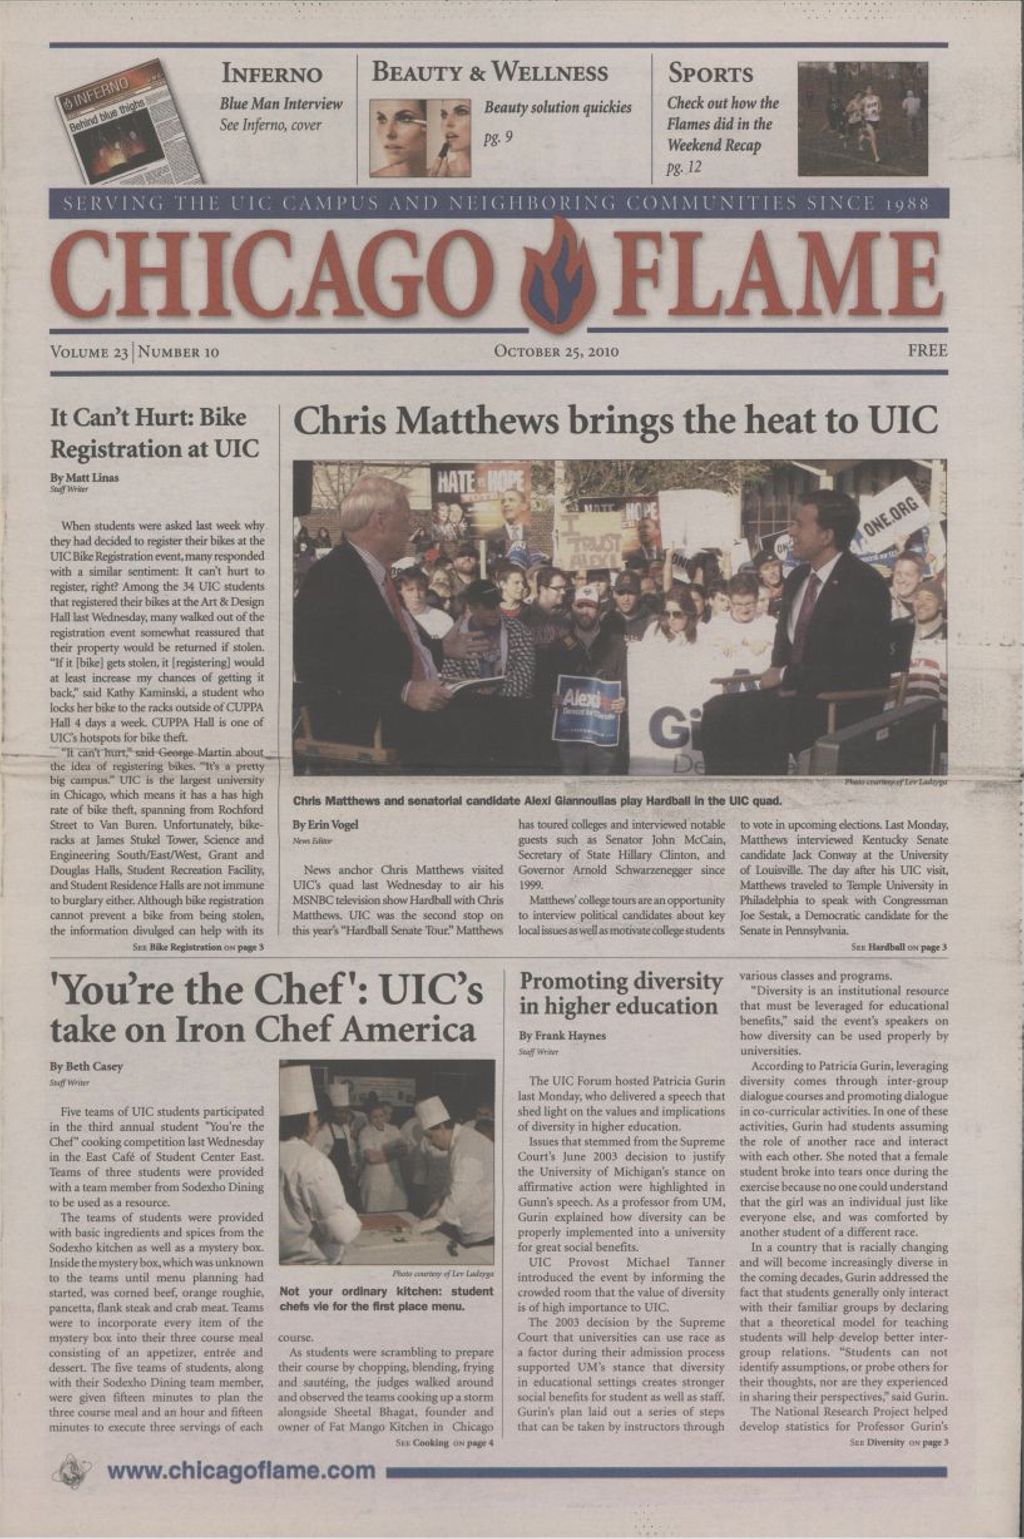 Miniature of Chicago Flame (October 25, 2010)